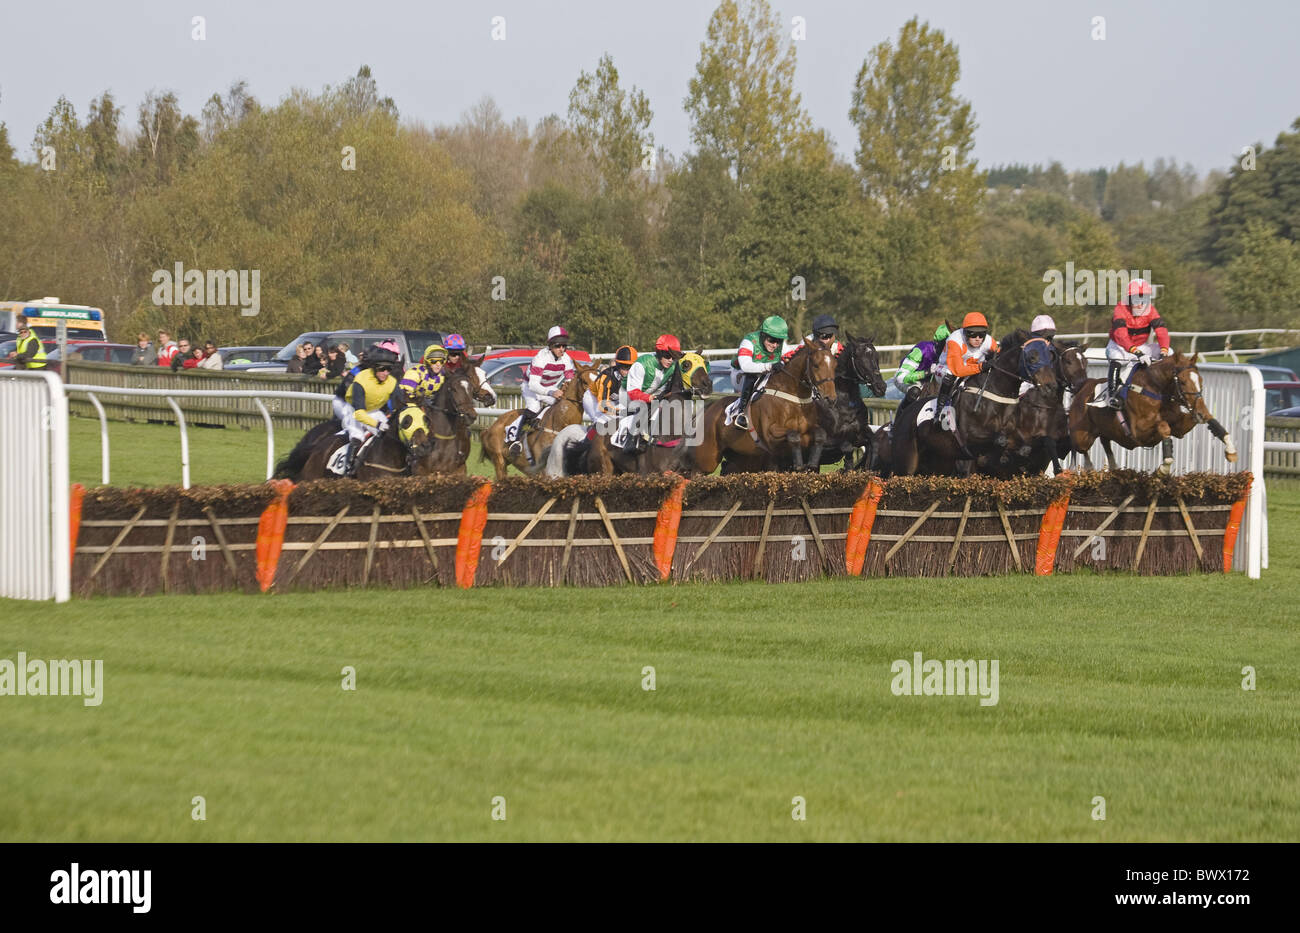 Horse racing Thoroughbred racehorses jumping Stock Photo